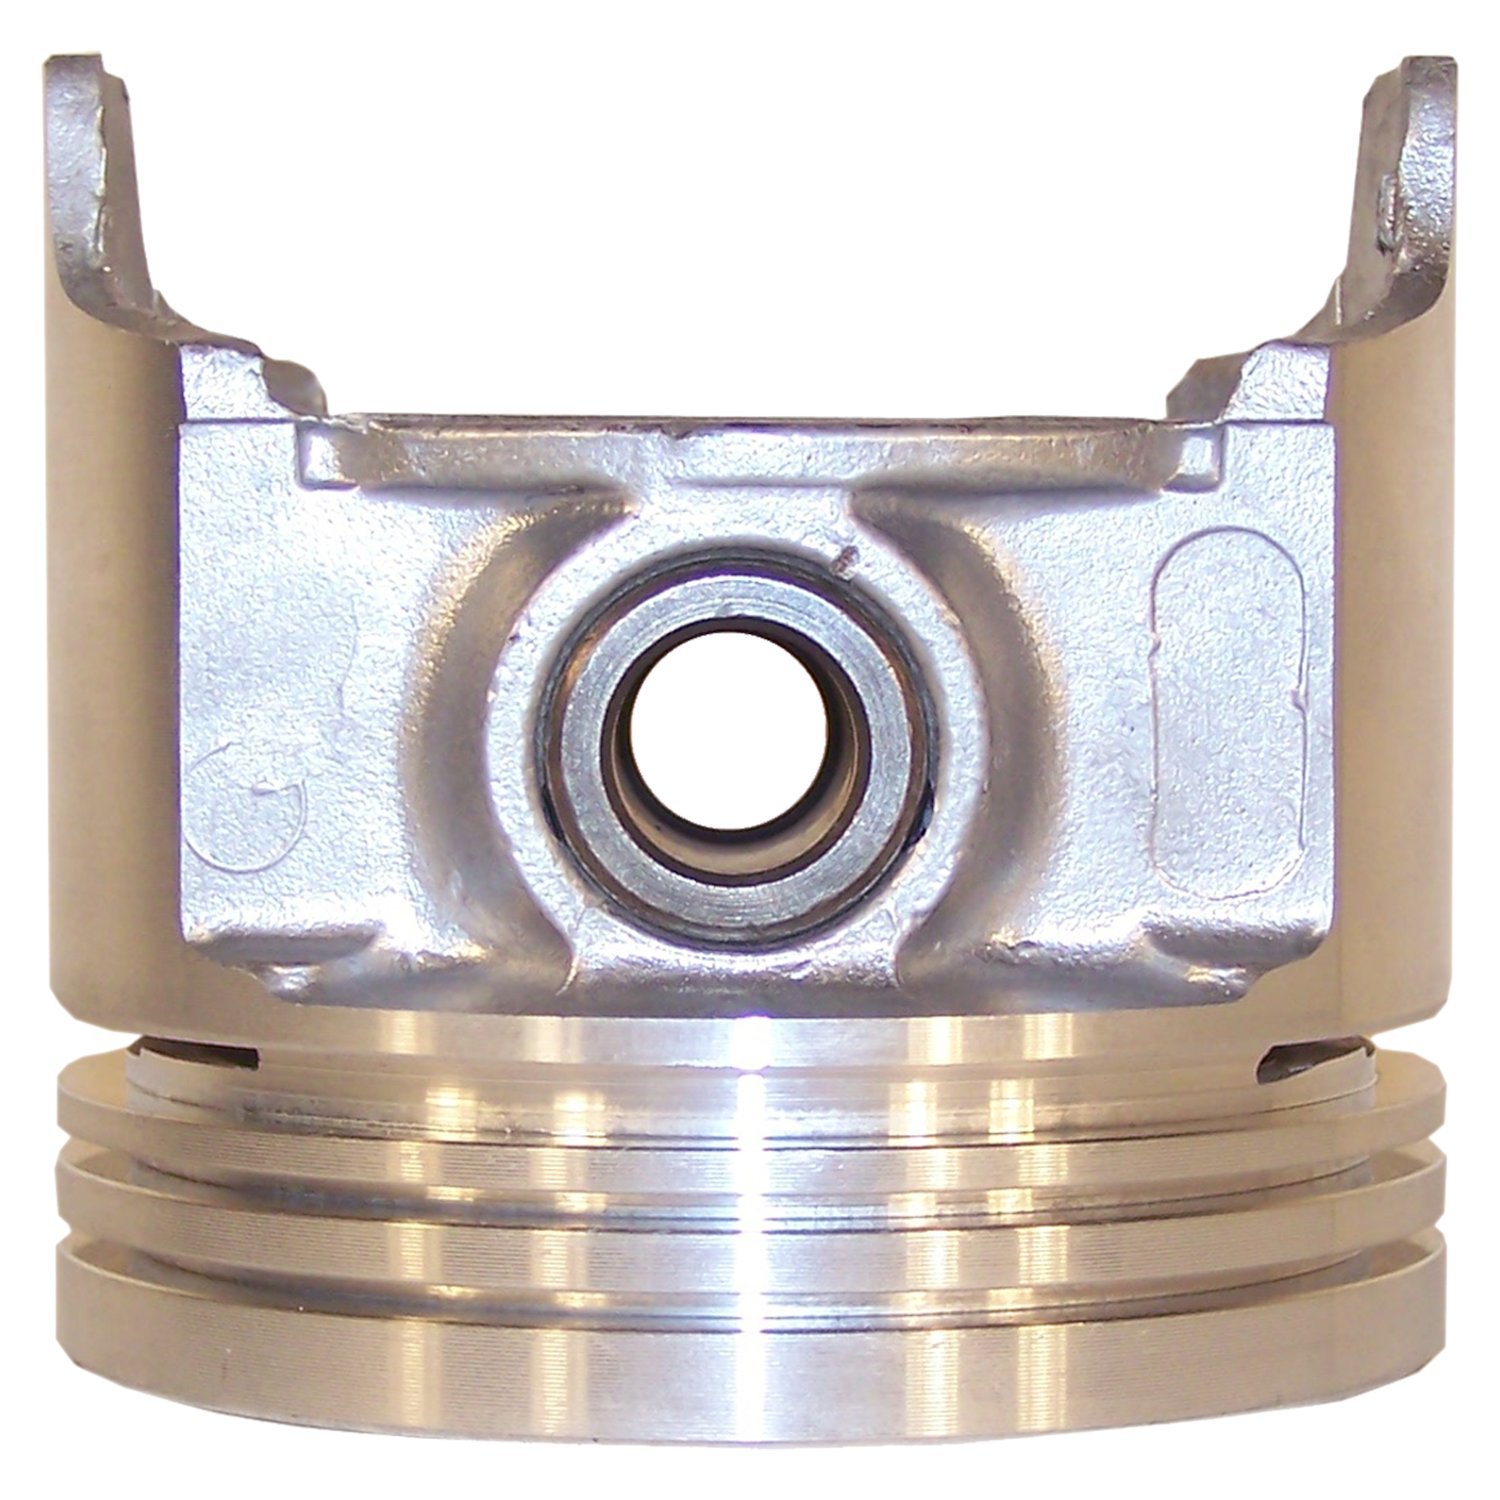 Standard Piston and Pin for 79-90 Misc. CJs, YJ, SJ, J-Series w/ 4.2L Engine